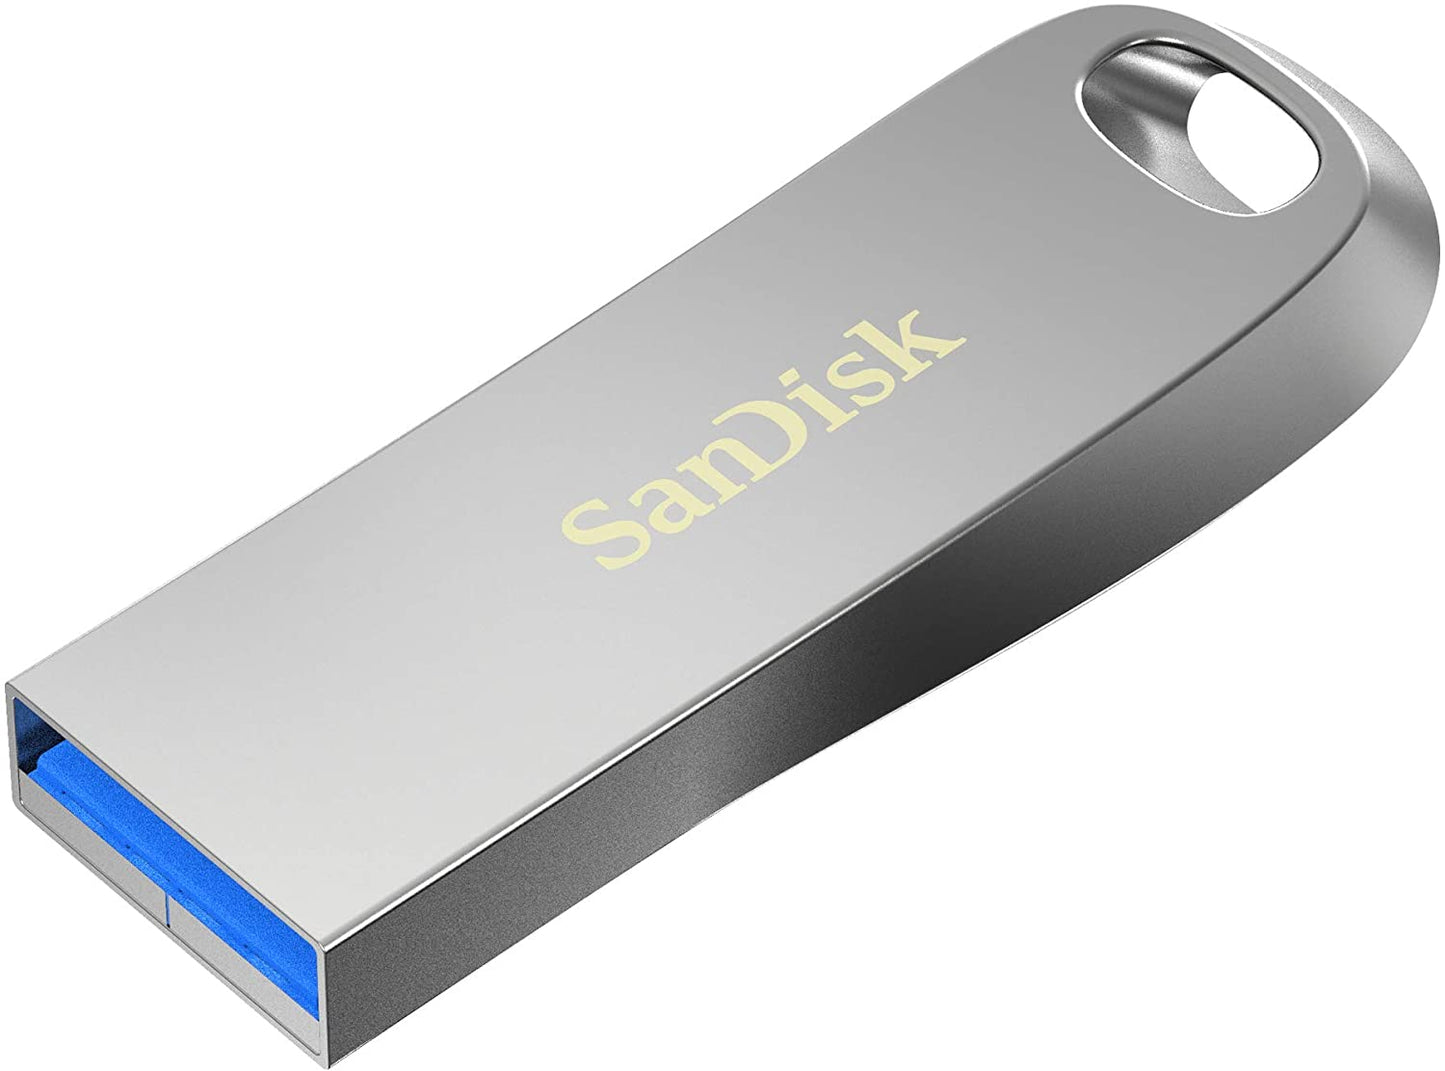 SanDisk Ultra Luxe 16GB / 32GB / 64GB / 128GB / 256GB USB 3.1 Flash Drive with 150MB/s Read Speed SDCZ74-016G-G46, SDCZ74-032G-G46, SDCZ74-064G-G46, SDCZ74-128G-G46, SDCZ74-256G-G46